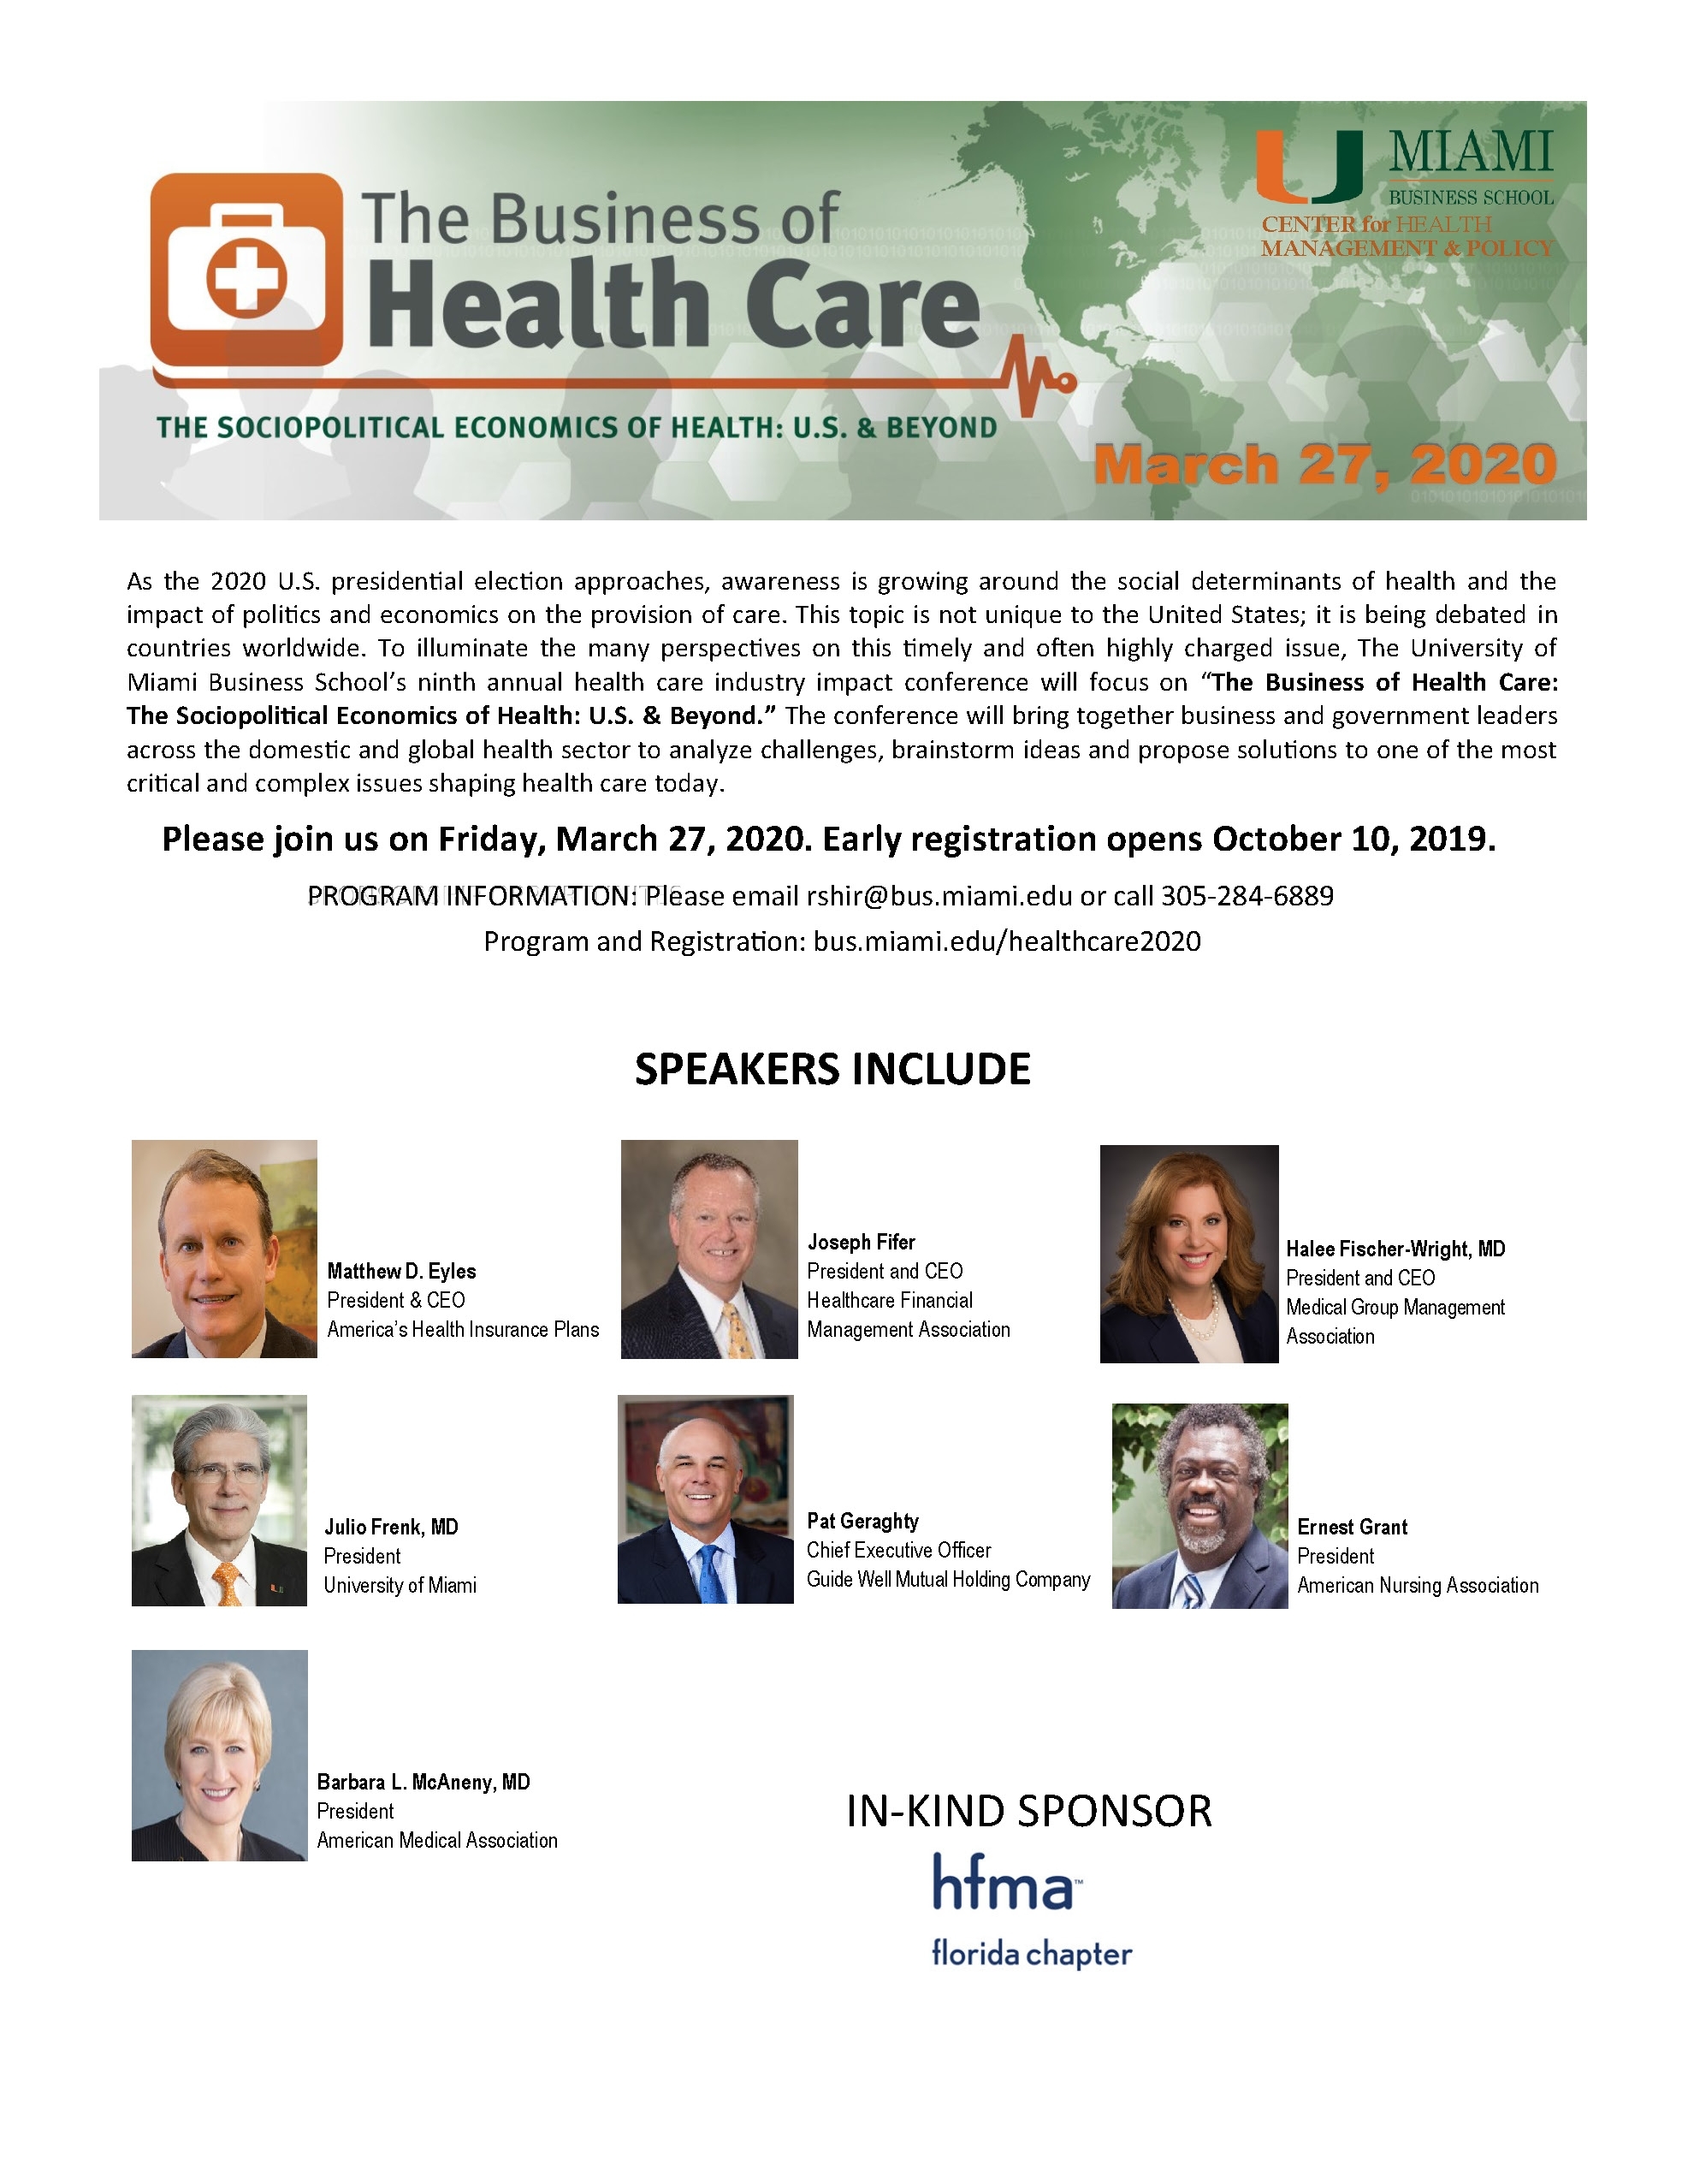 Florida Chapter Of Hfma – University Of Miami&#039;s The Business